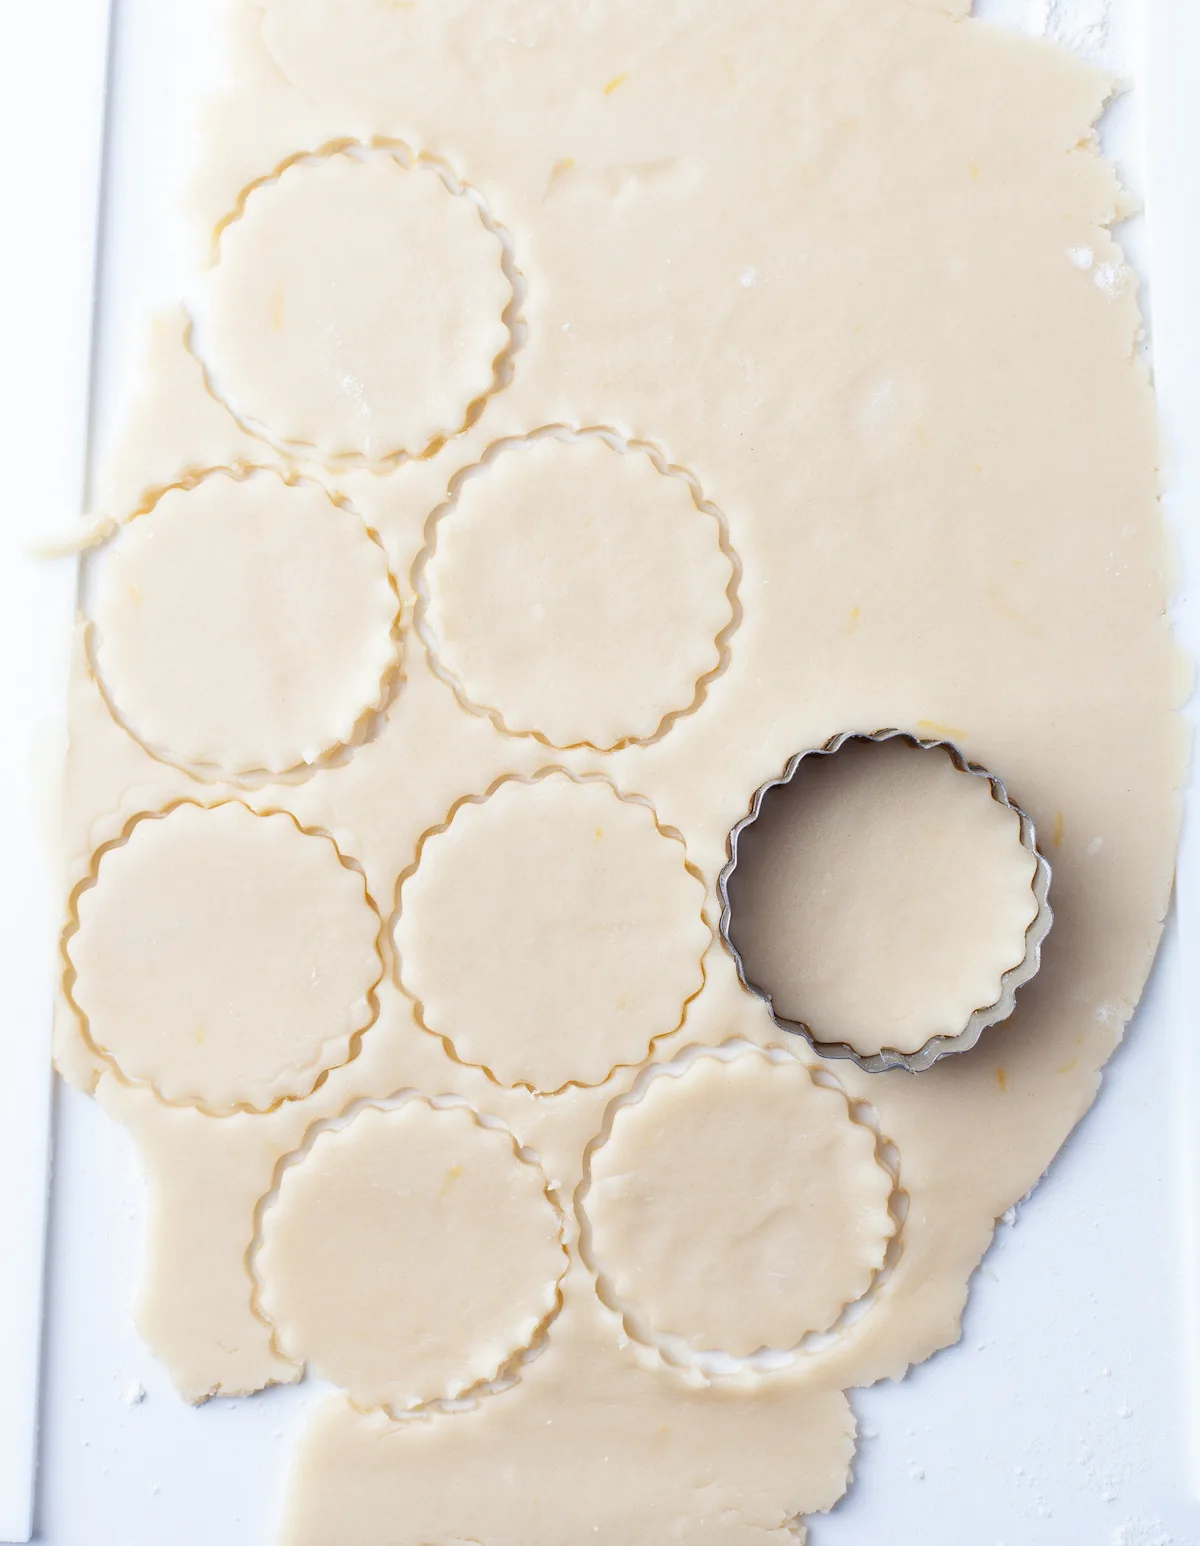 Lemon cookies being cut out of dough